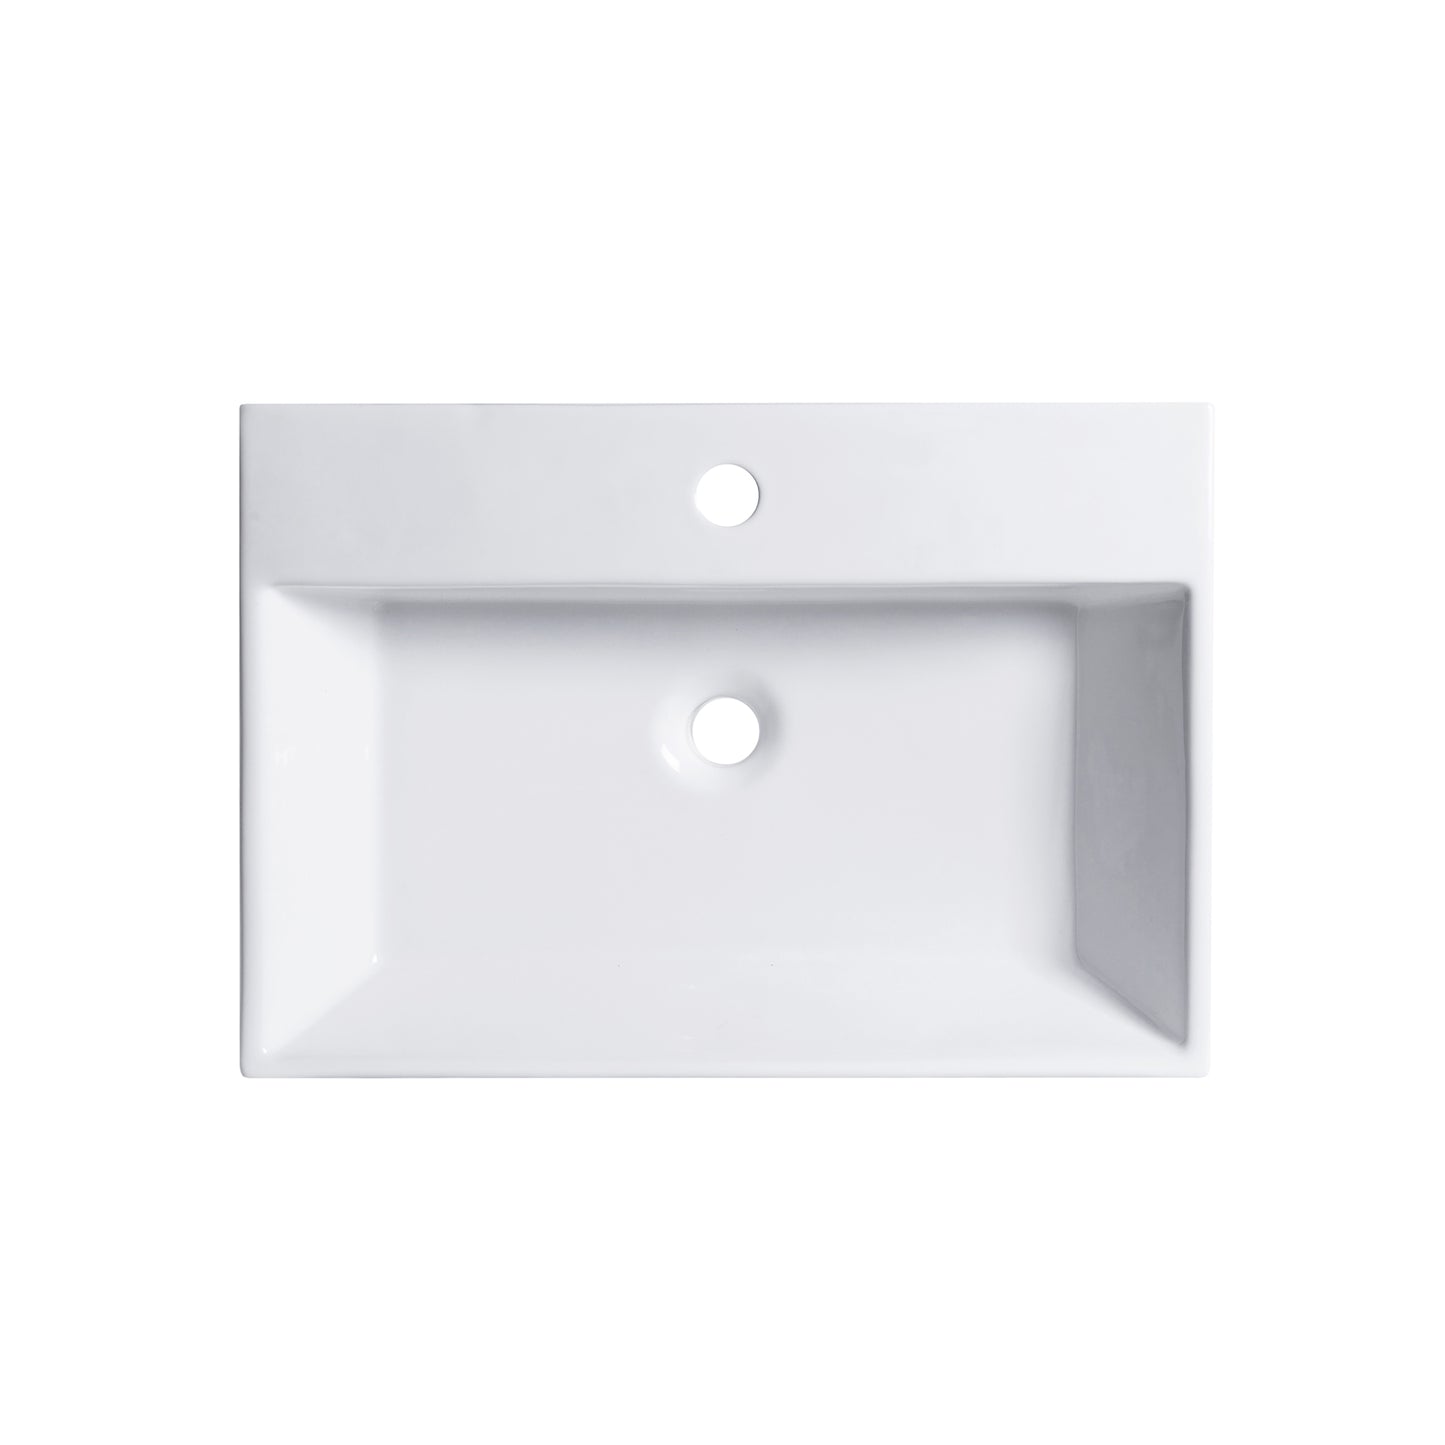 Fremont 24 in. Rectangle White Finish Ceramic Vessel Bathroom Vanity Sink with Overflow